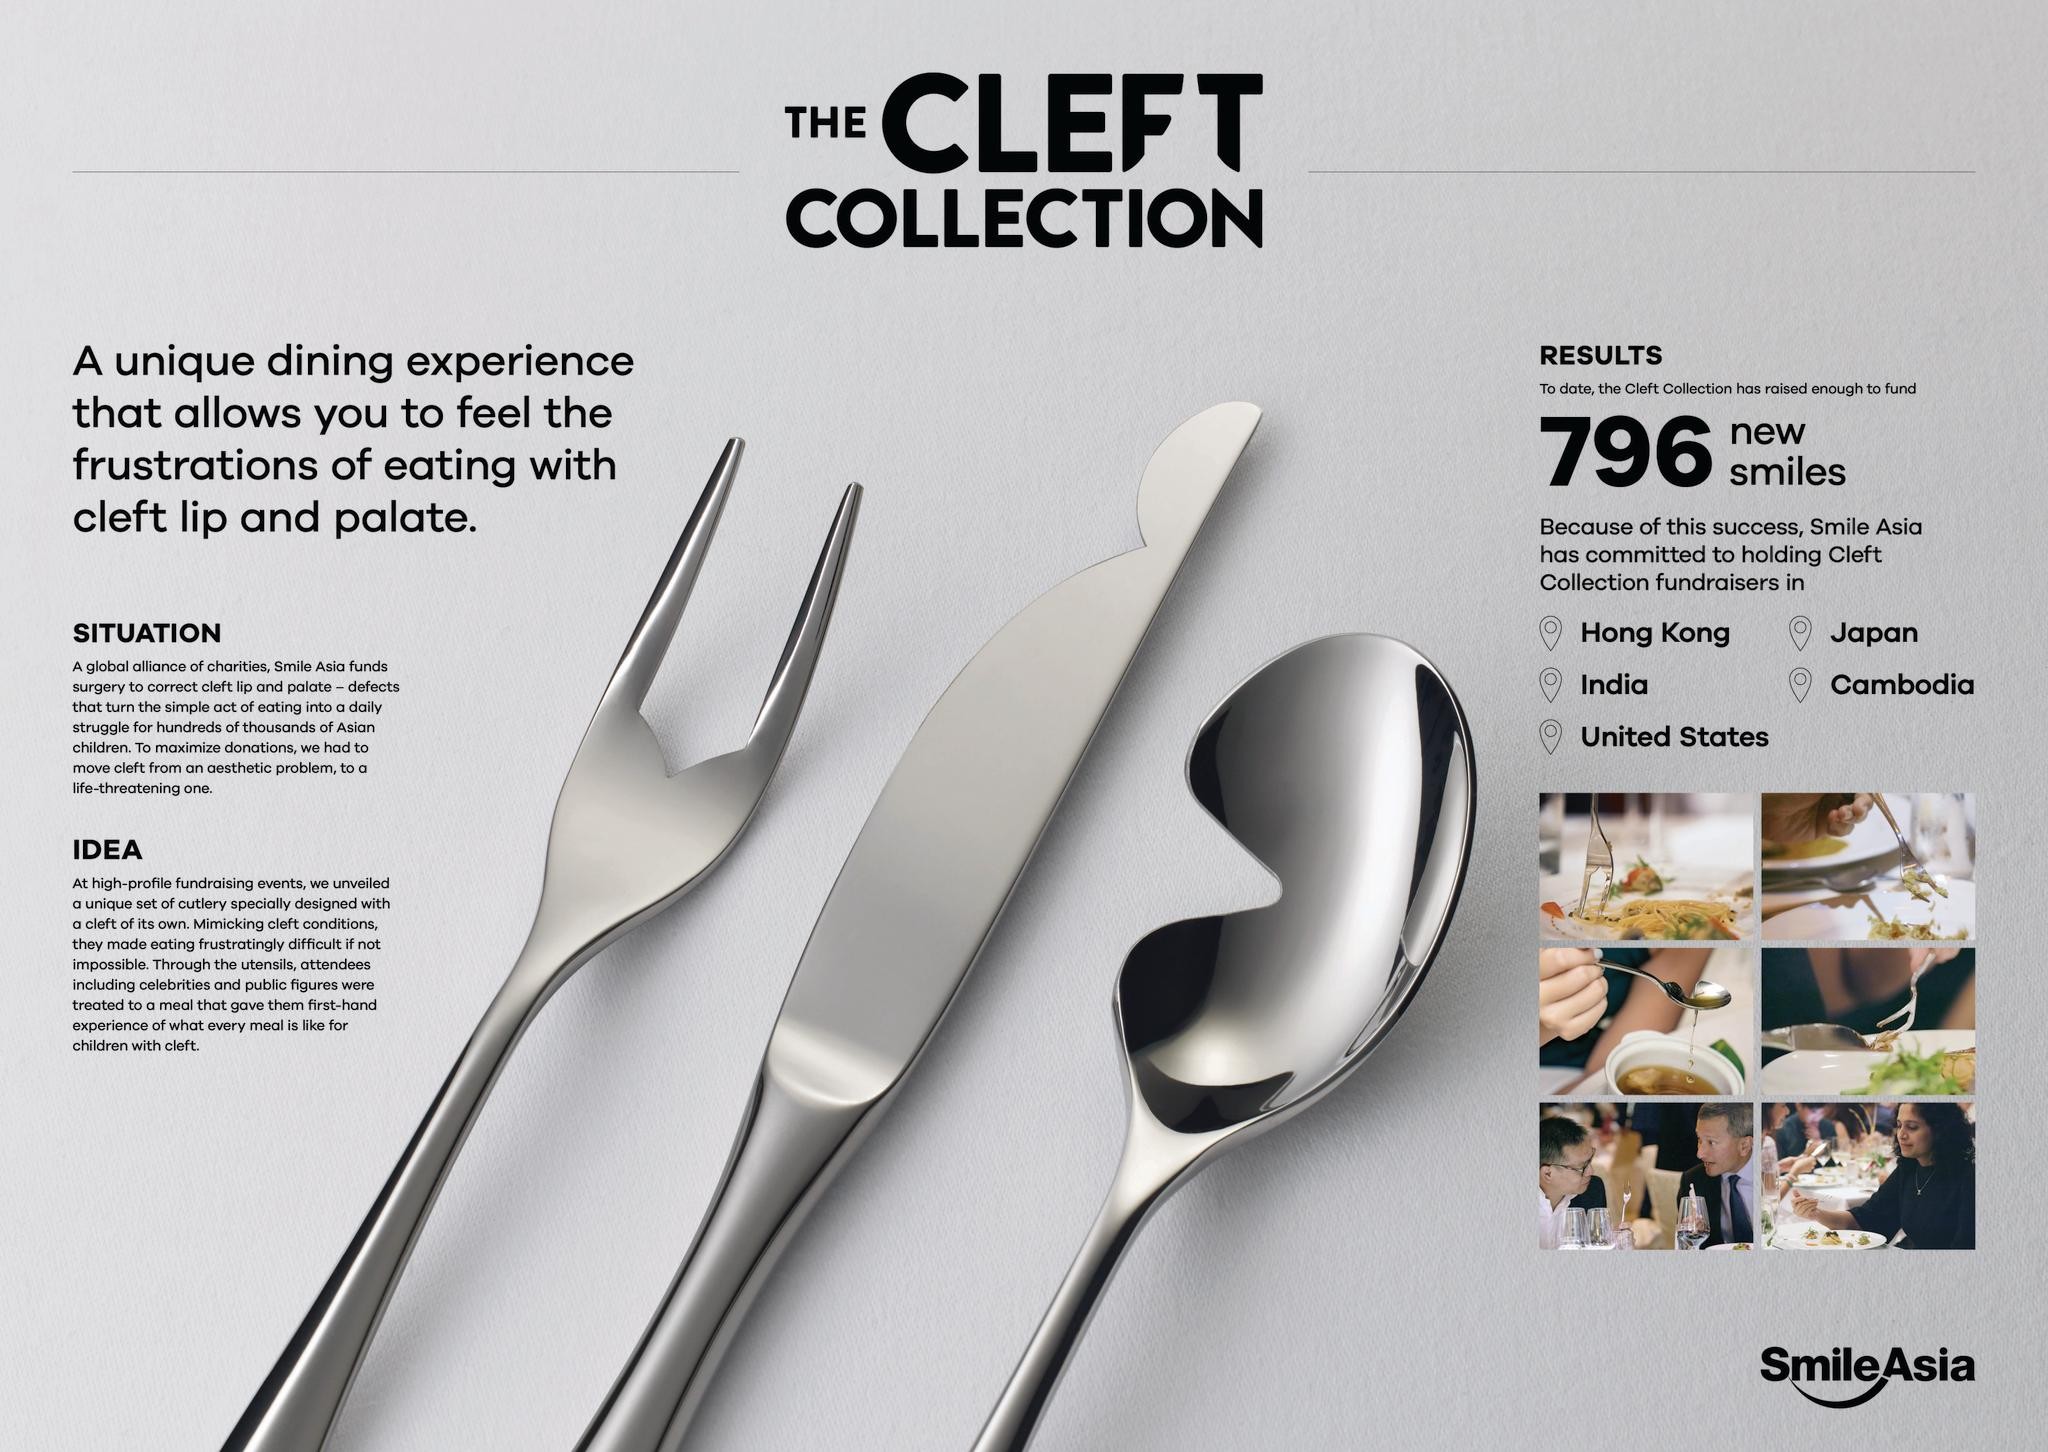 The Cleft Collection